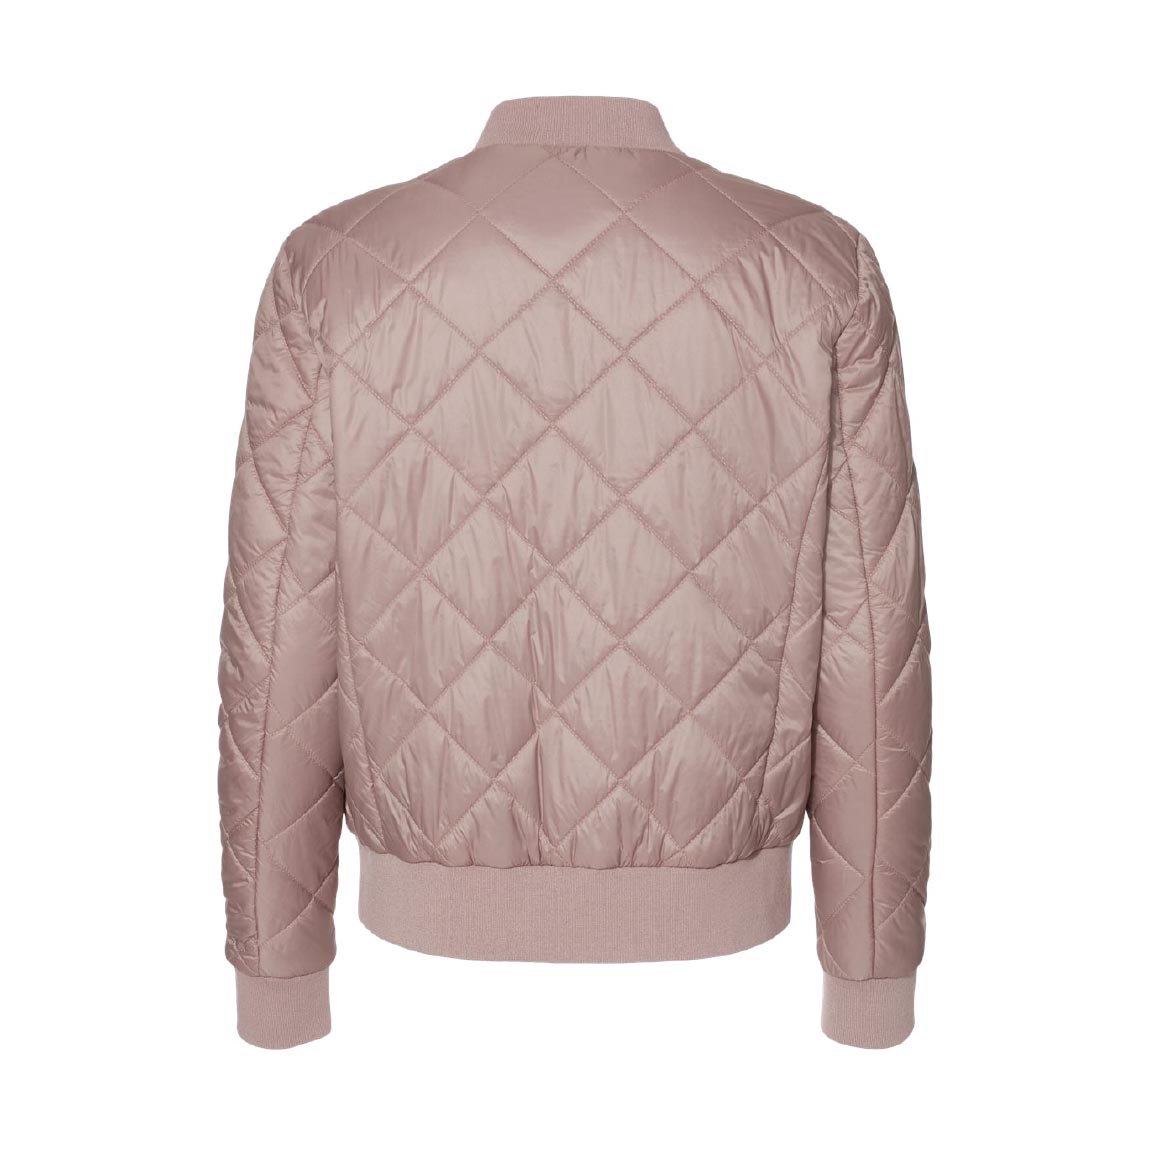 Women's Heat Last Quilted Packable Bomber